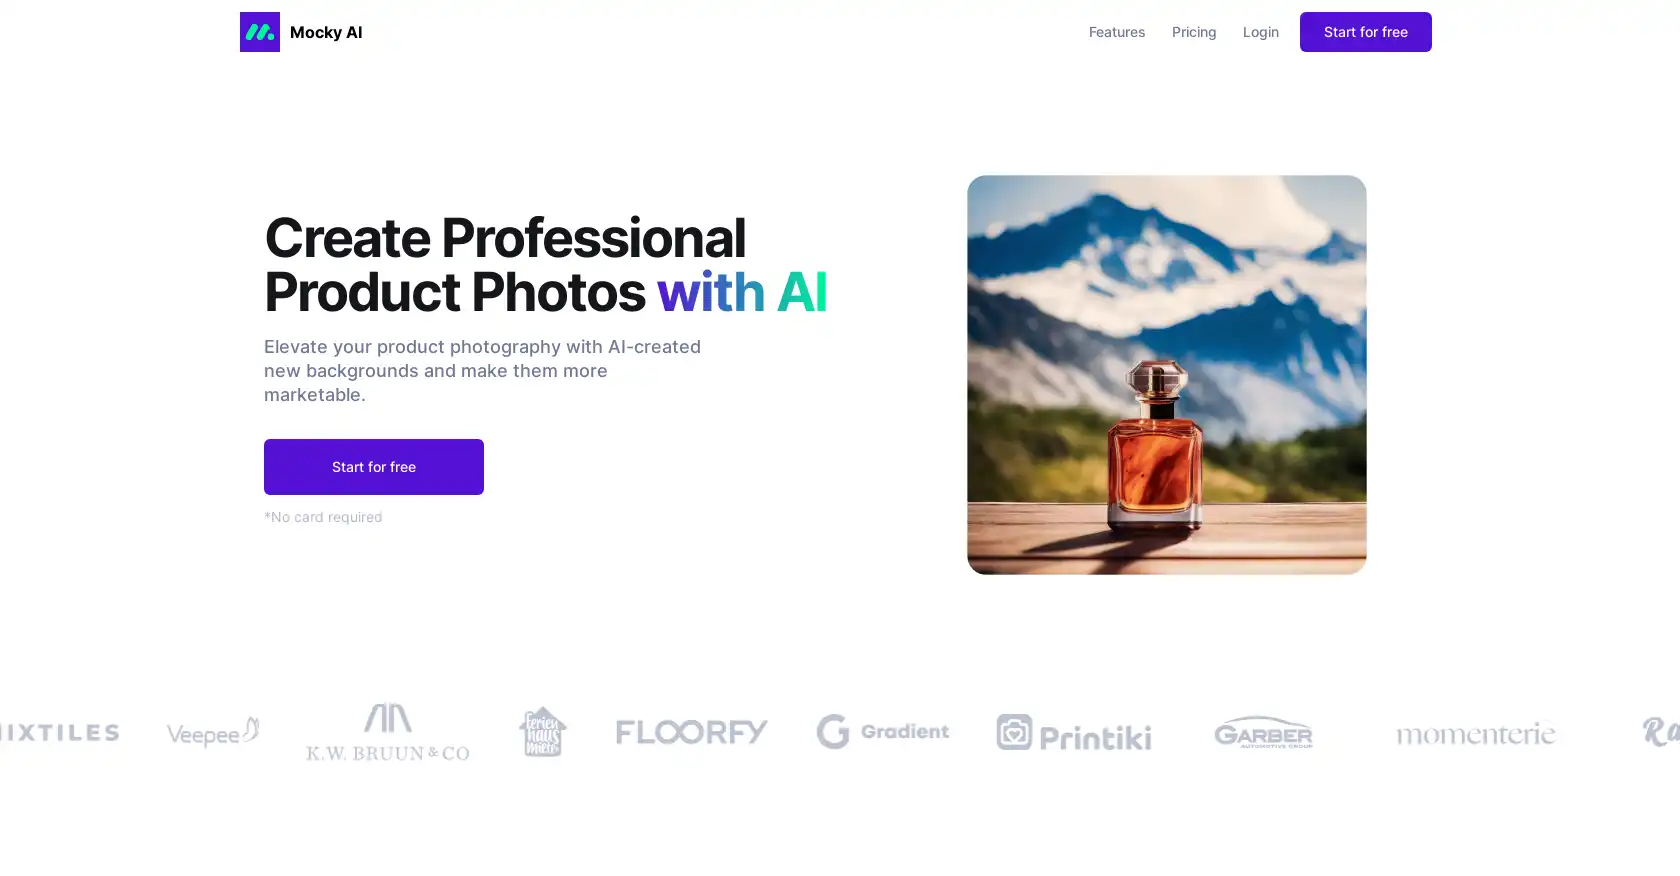 Mocky AI - AI tool for Image Generator, Background removal, Photo editing, Customizable backgrounds, Background Replacement